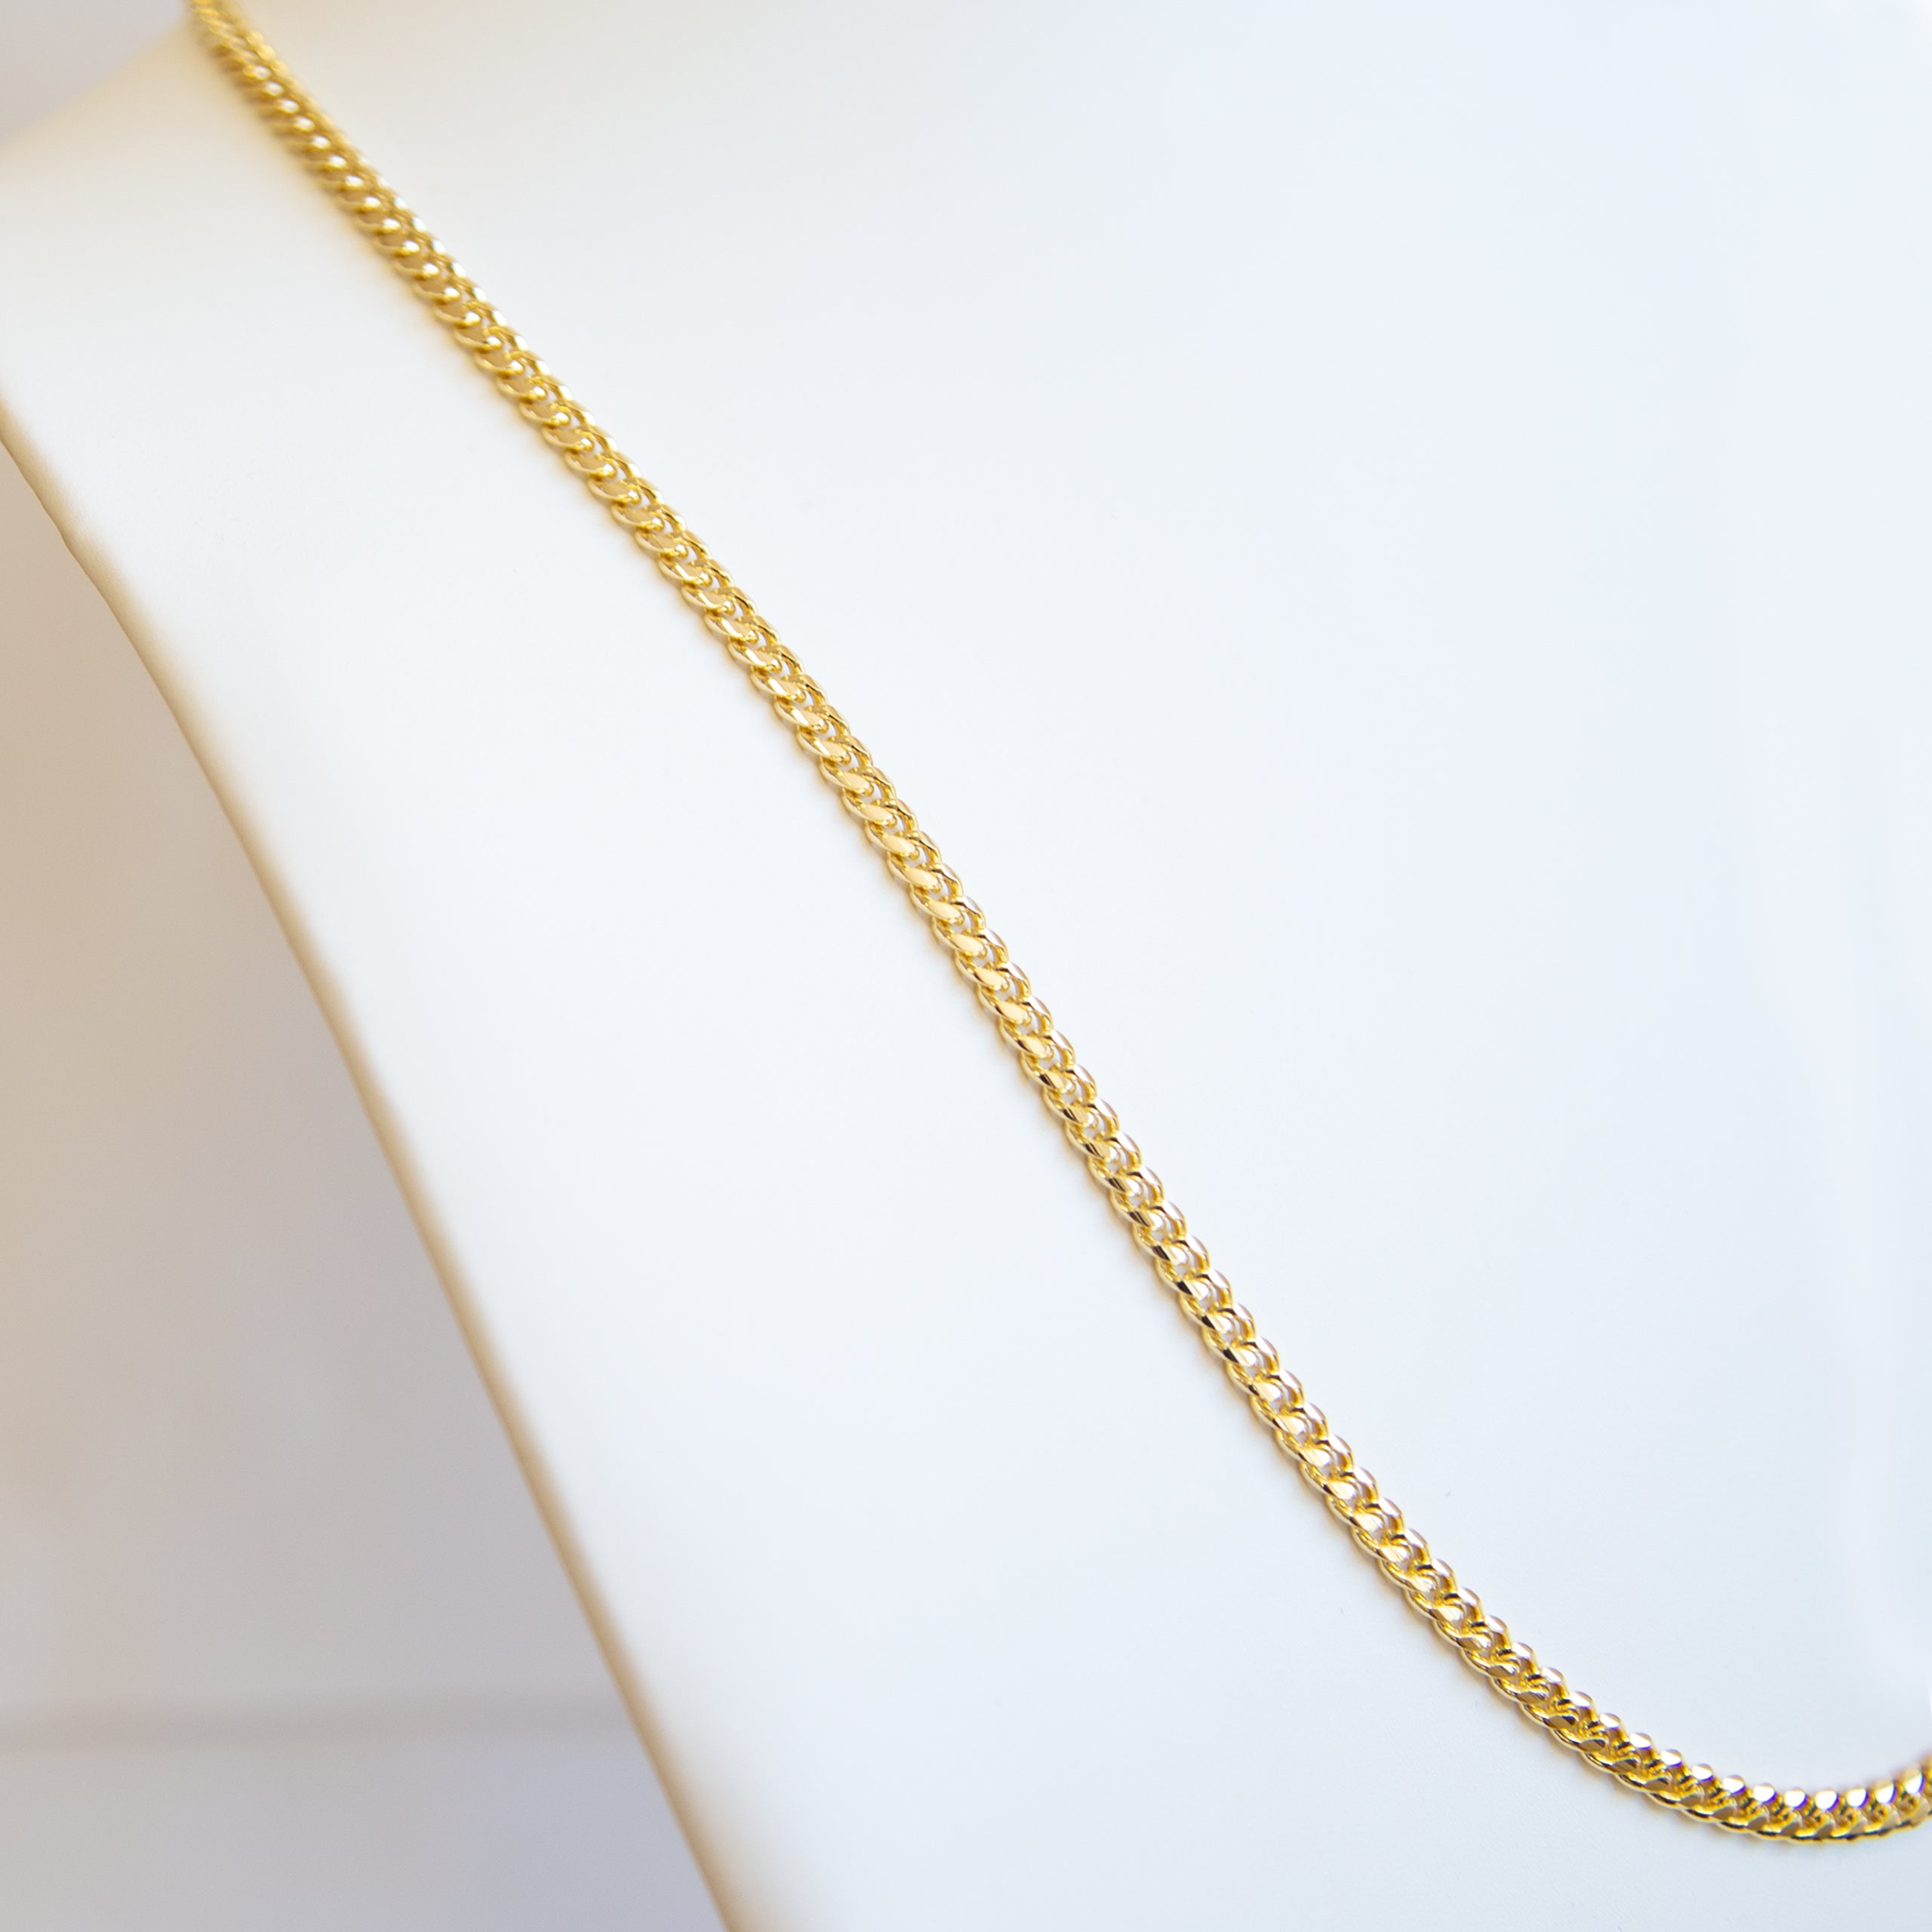 CHAIN NECKLACE - Curb 24"